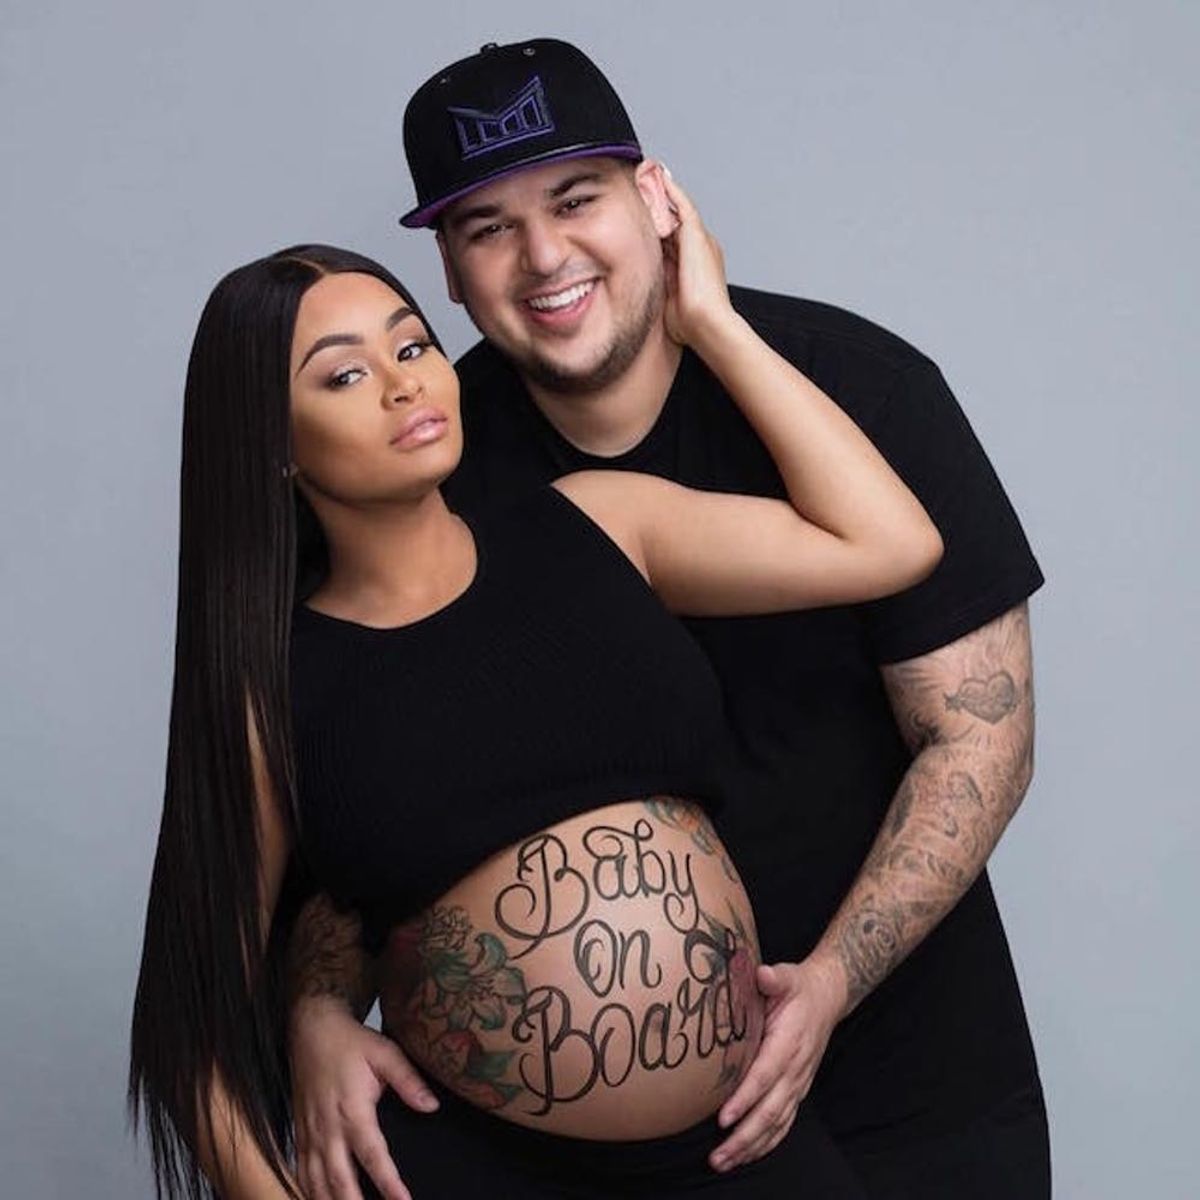 Morning Buzz! Rob Kardashian and Blac Chyna Revealed the Sex of Their Baby and Major Drama Followed + More